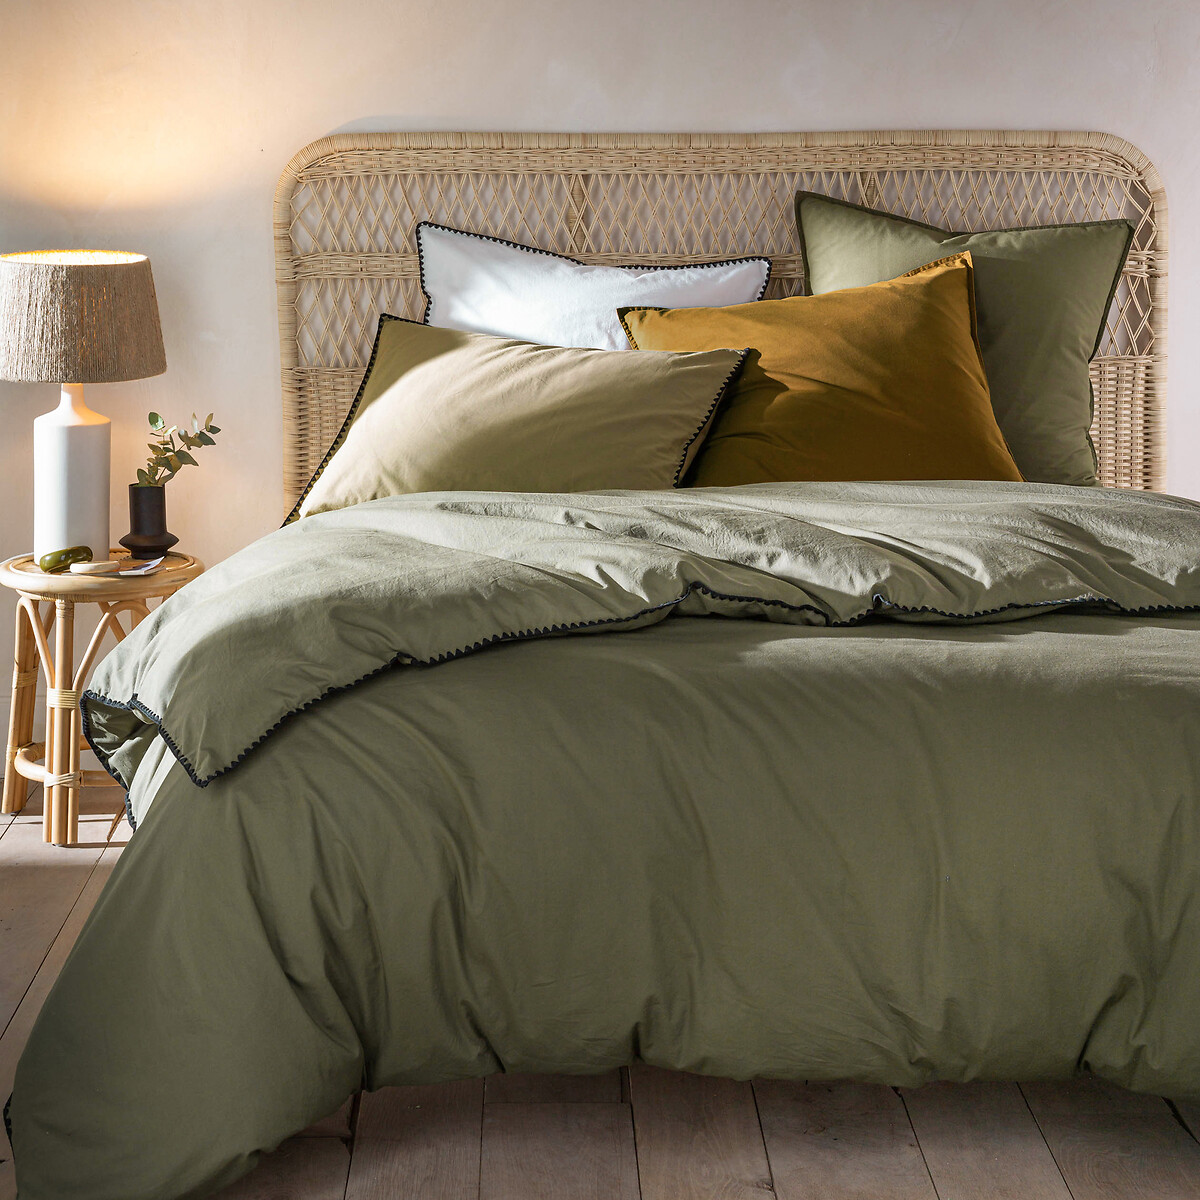 Washed Cotton Duvet Cover La Redoute, Olive Green Duvet Cover Nz